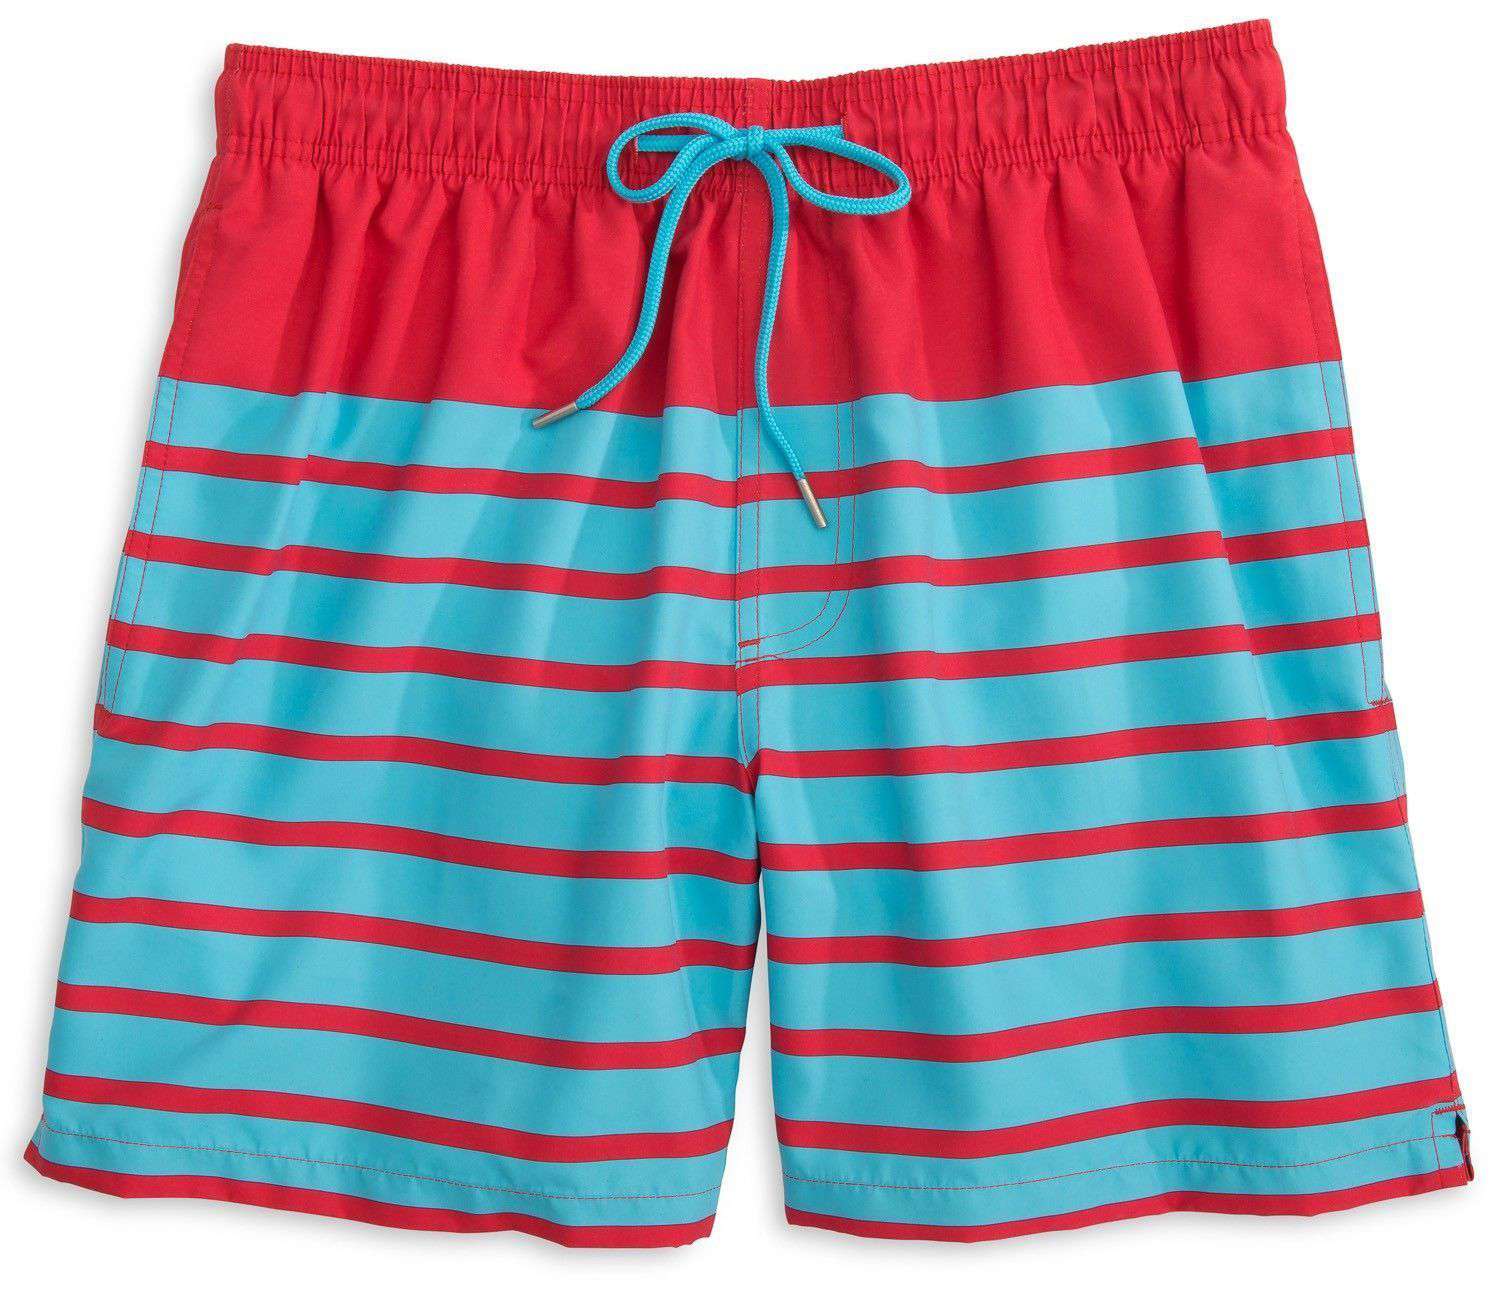 Southern Tide For Shore Stripe Swim Trunks in Channel Marker Red/Turquoise